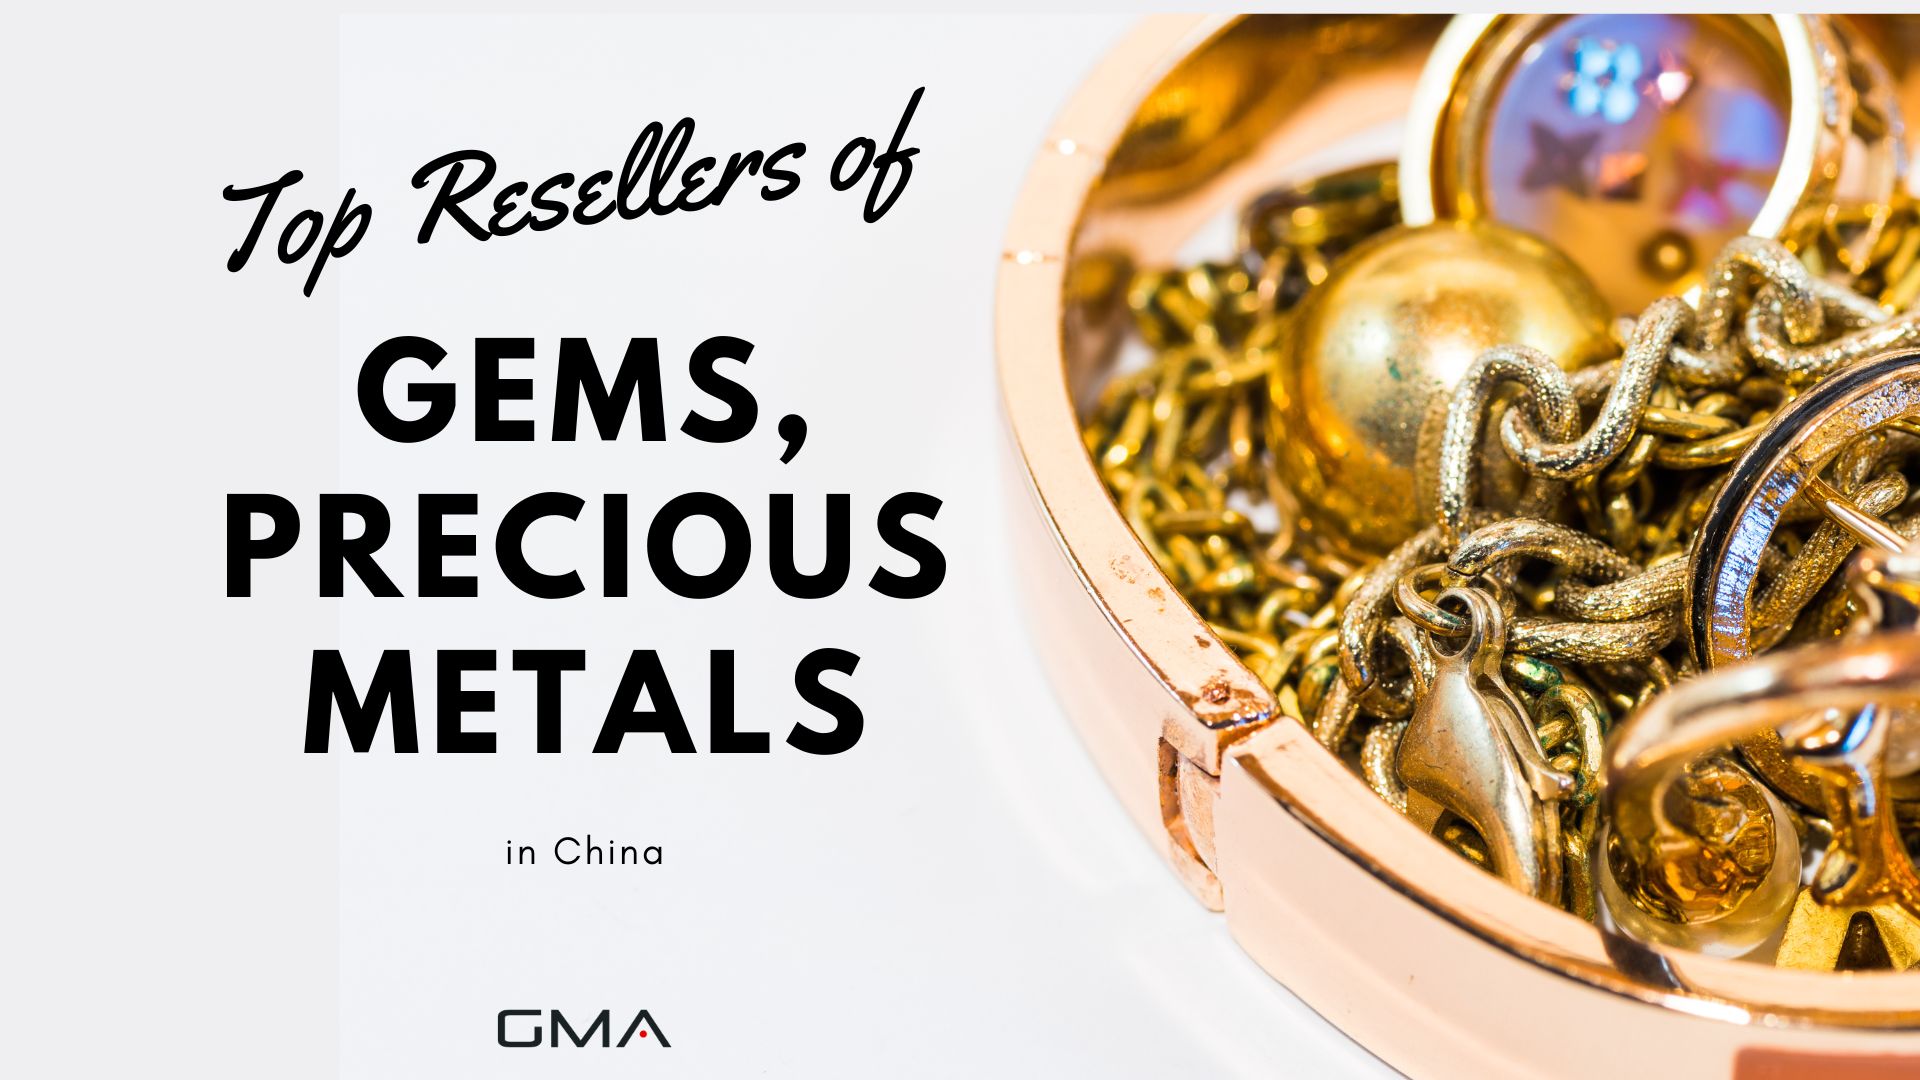 Top Resellers of Gems, Precious Metals in China